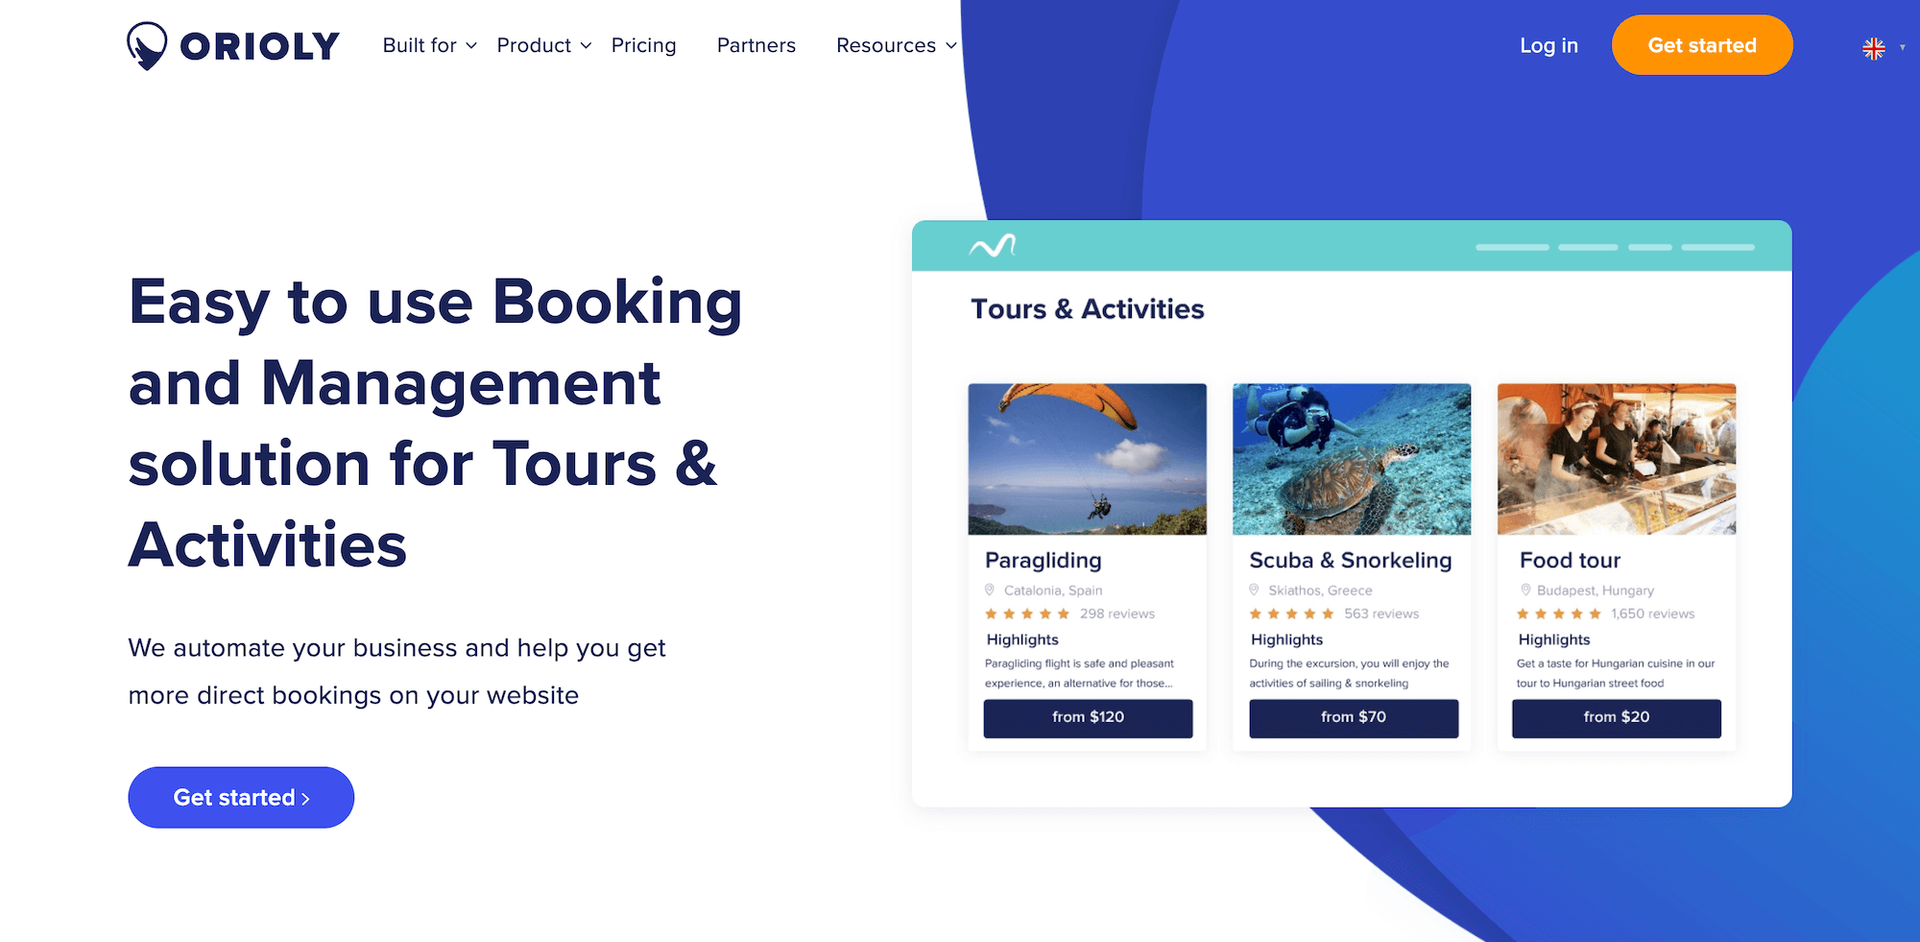 Orioly homepage: Easy to use Booking and Management solution for Tours & Activities